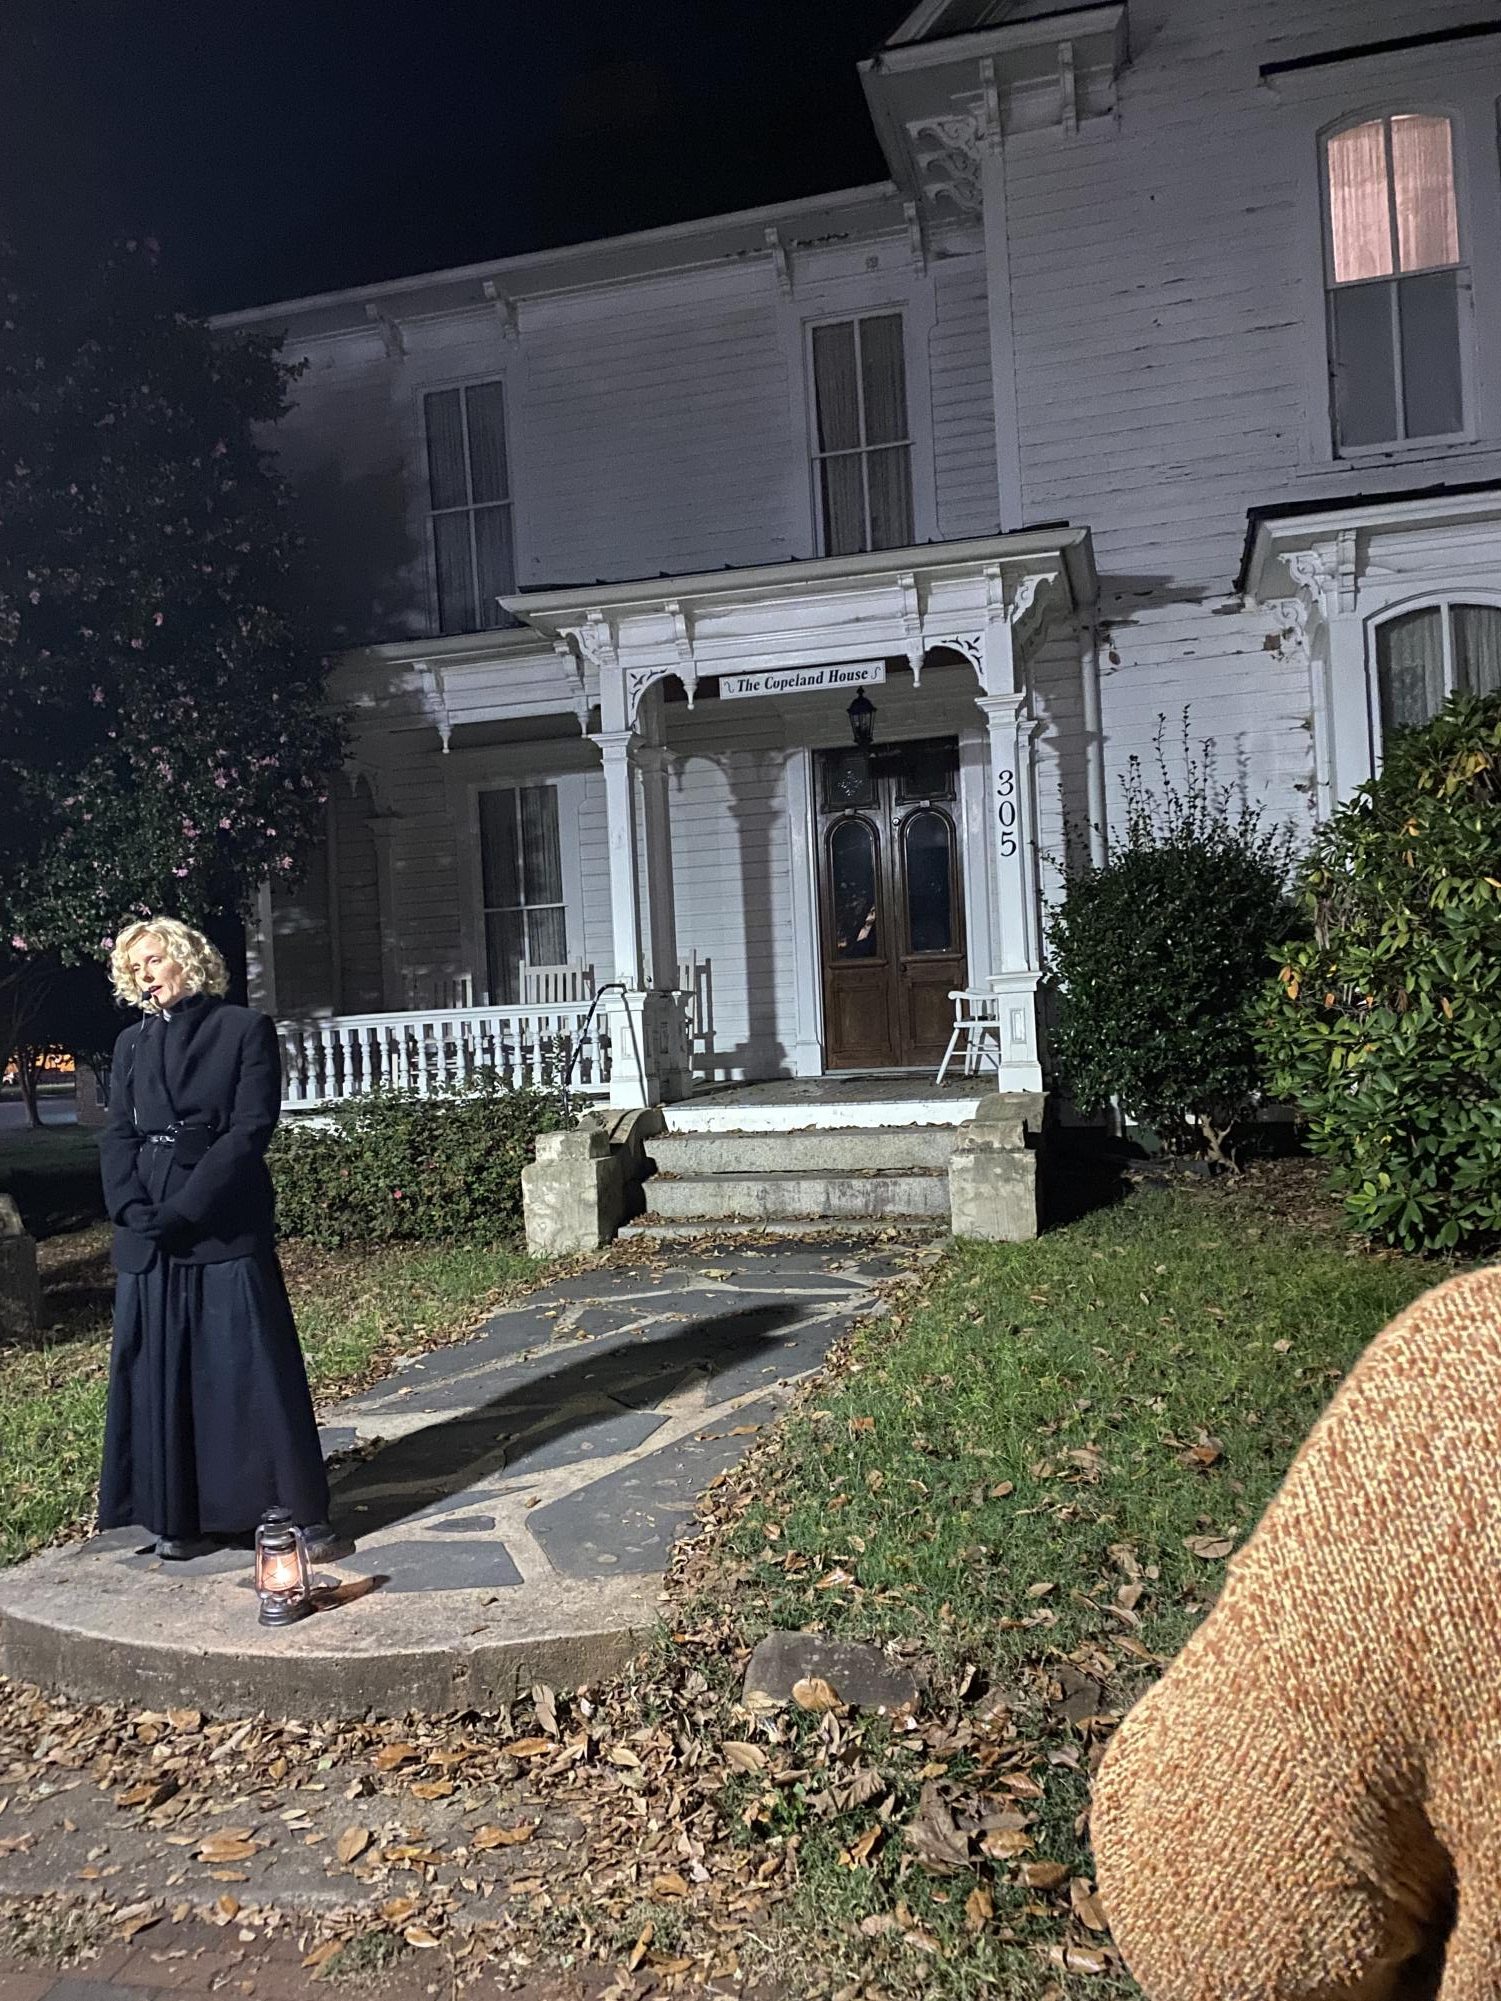 Tour guide, Megan Knorpp, stands in front of the Copeland House on Davidson’s historic (and spooky) North Main Street and shares Halloween and historic tales perfect for the season.